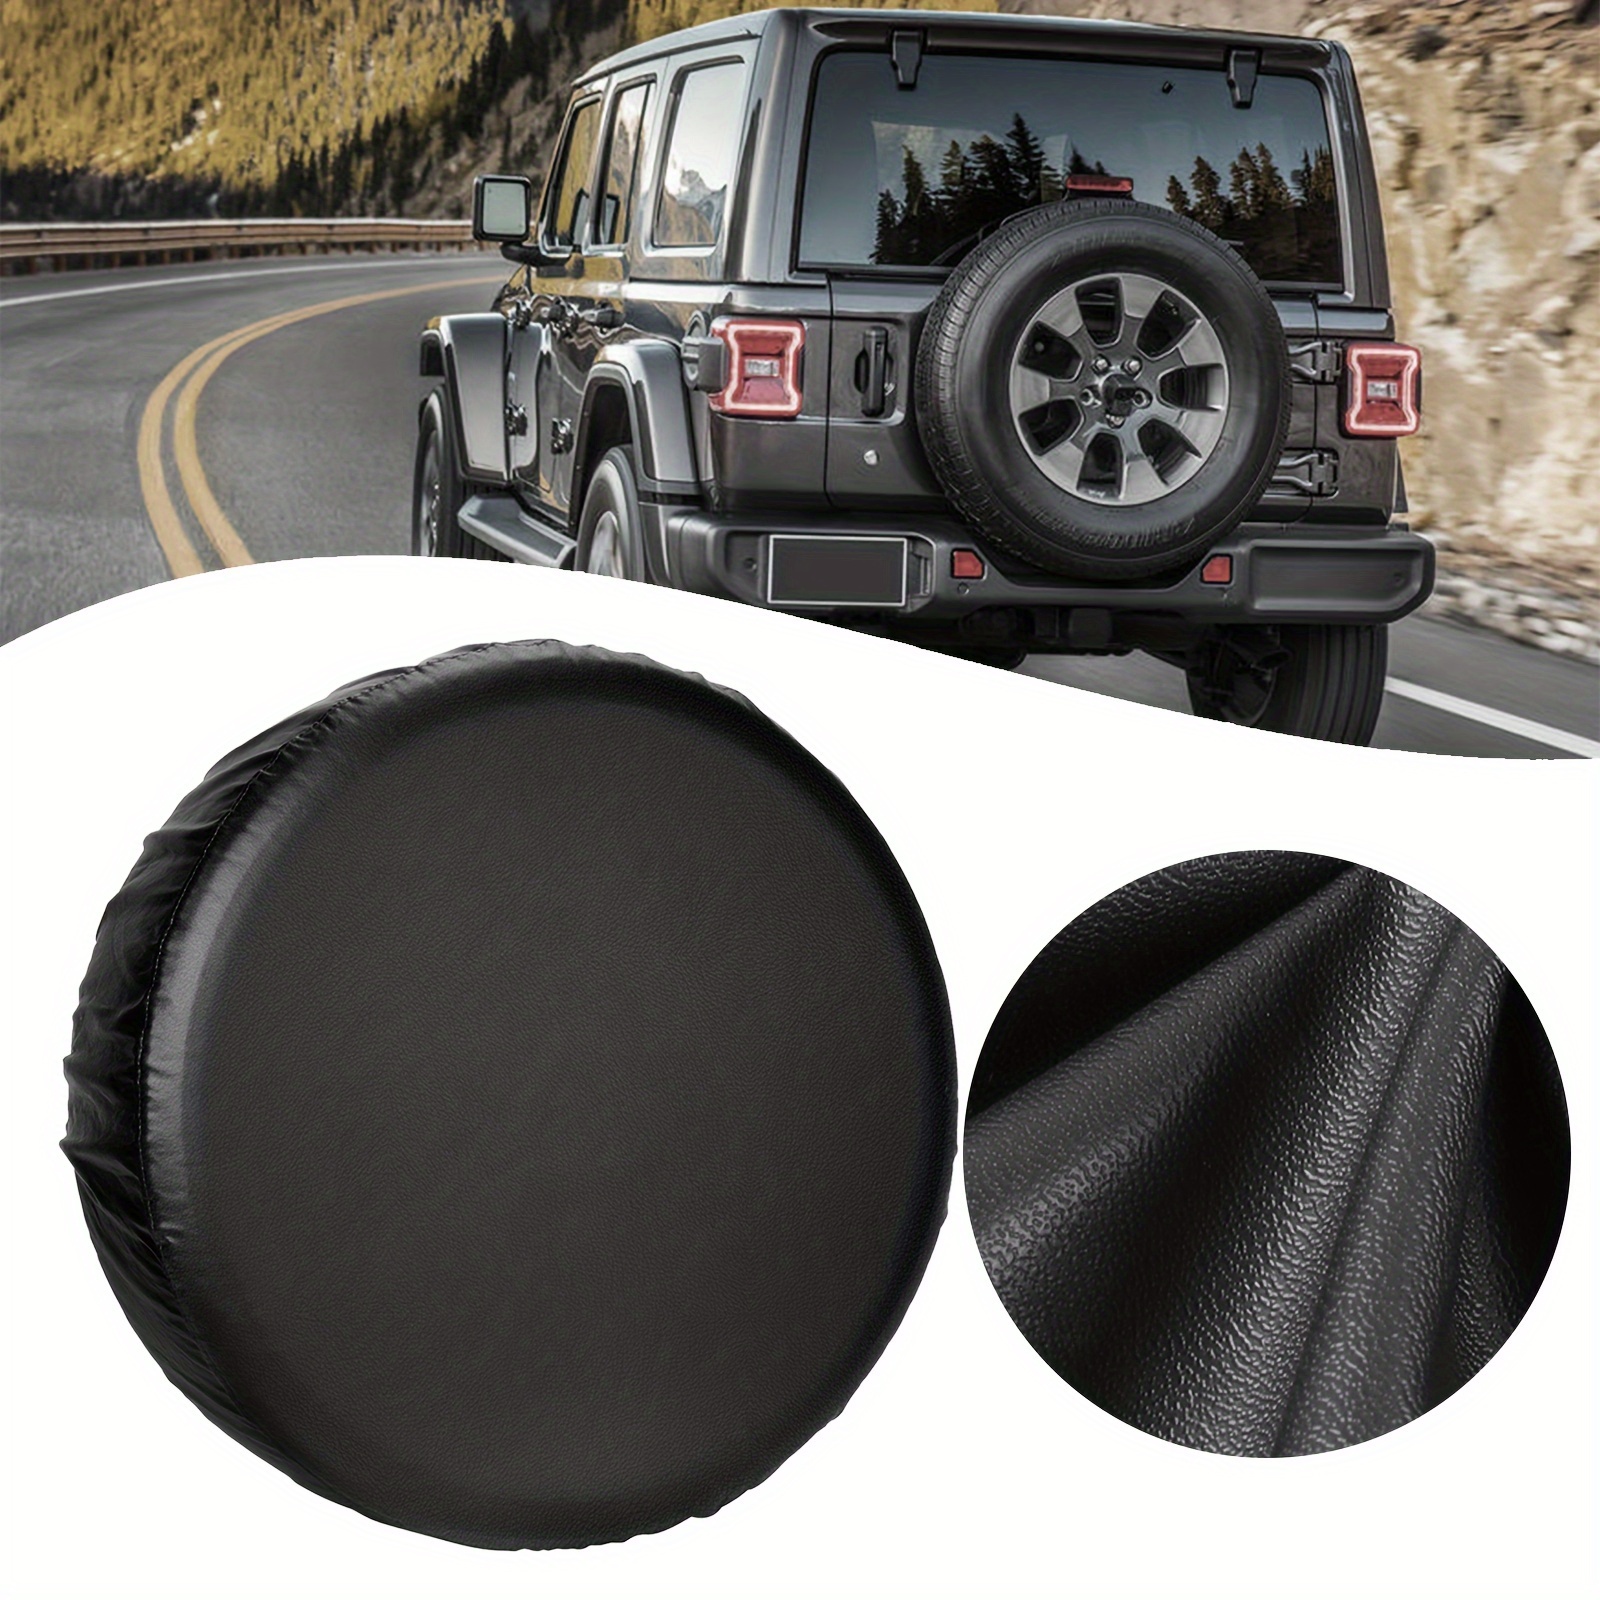 

Spare Tire Cover Thickening Pu Leather Universal Fit For Trailer Rv Car Truck Wheel